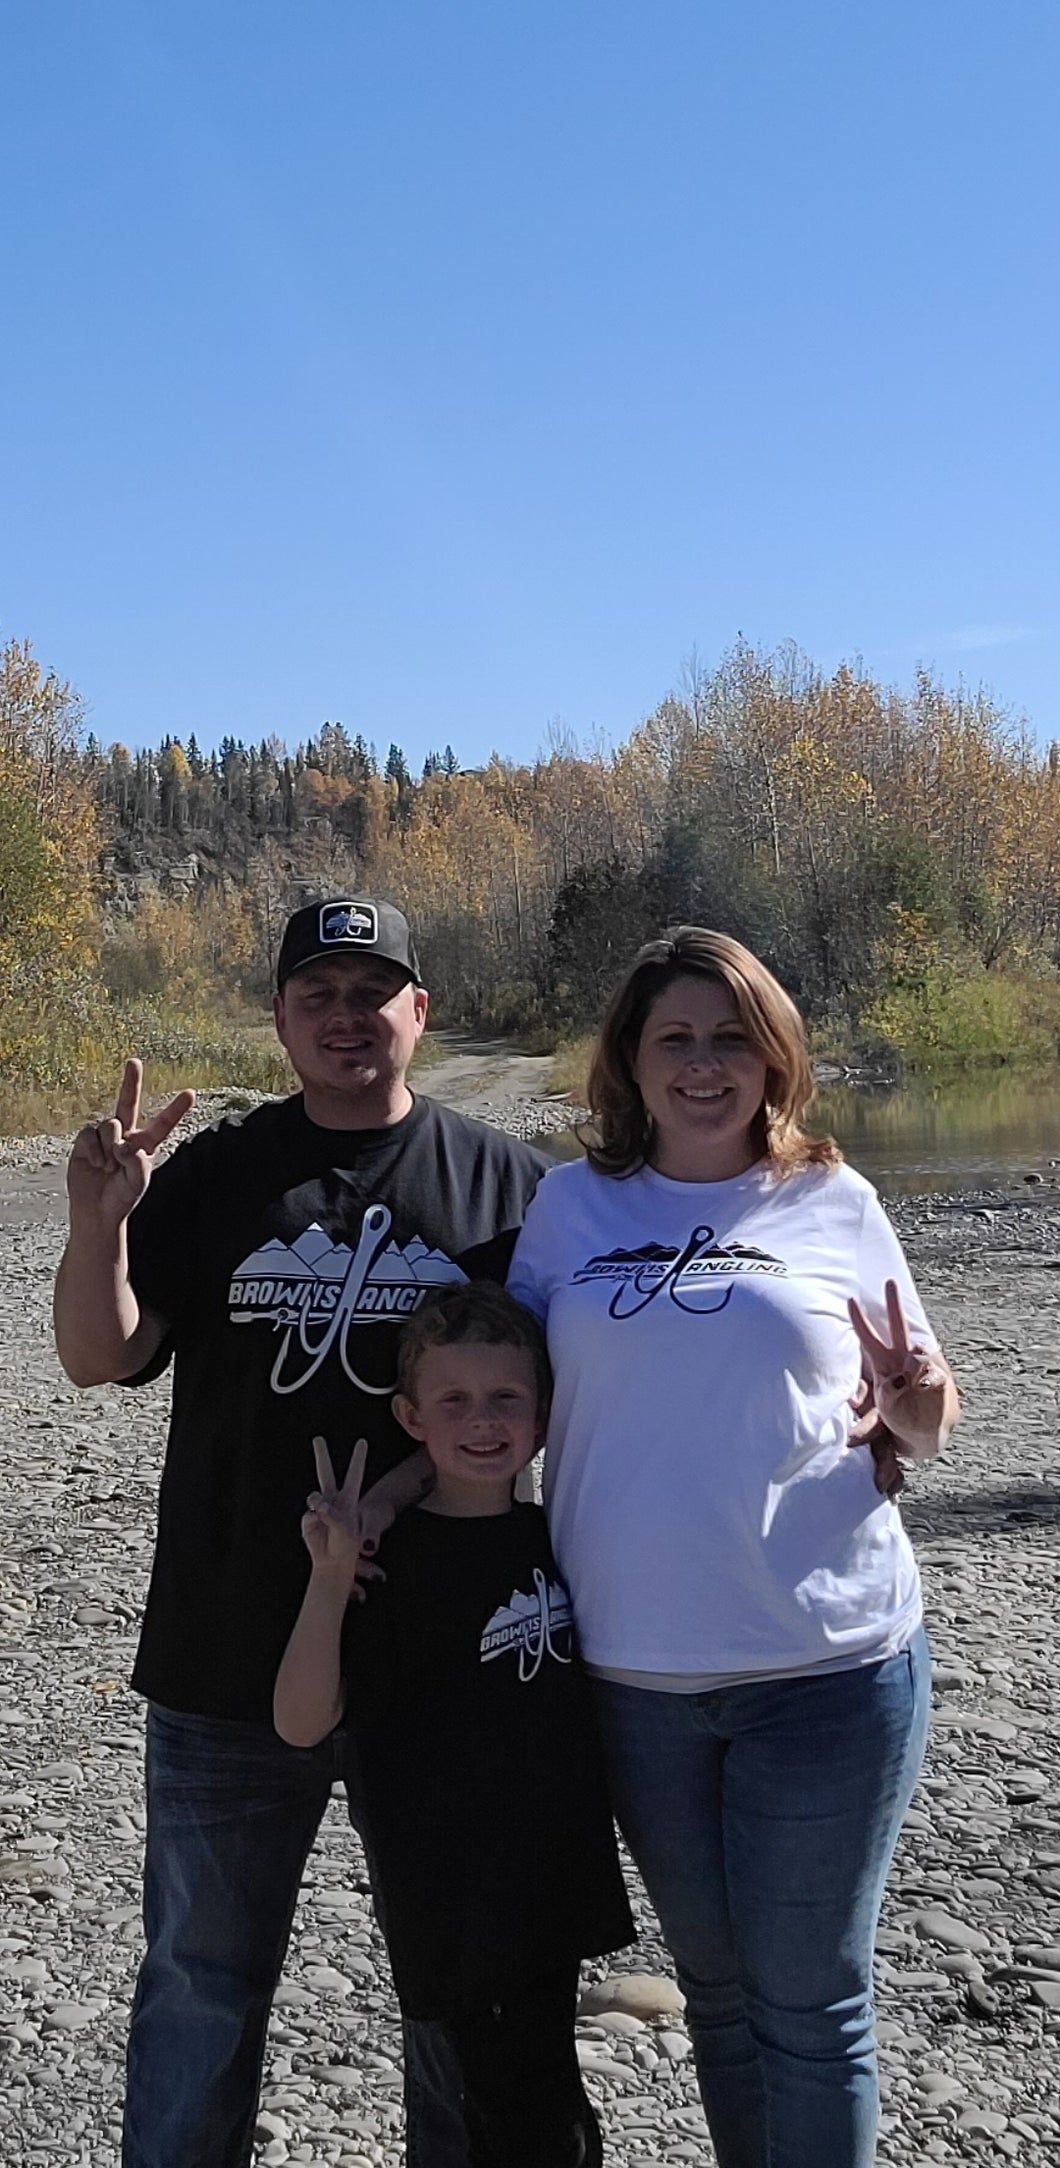 Hello, Meet the Browns! We are a outdoor loving family who live in Alberta Canada.  Whether it's your first cast or your 1 millionth, our line of tackle will get you on the fish. We will see you on the lake! 